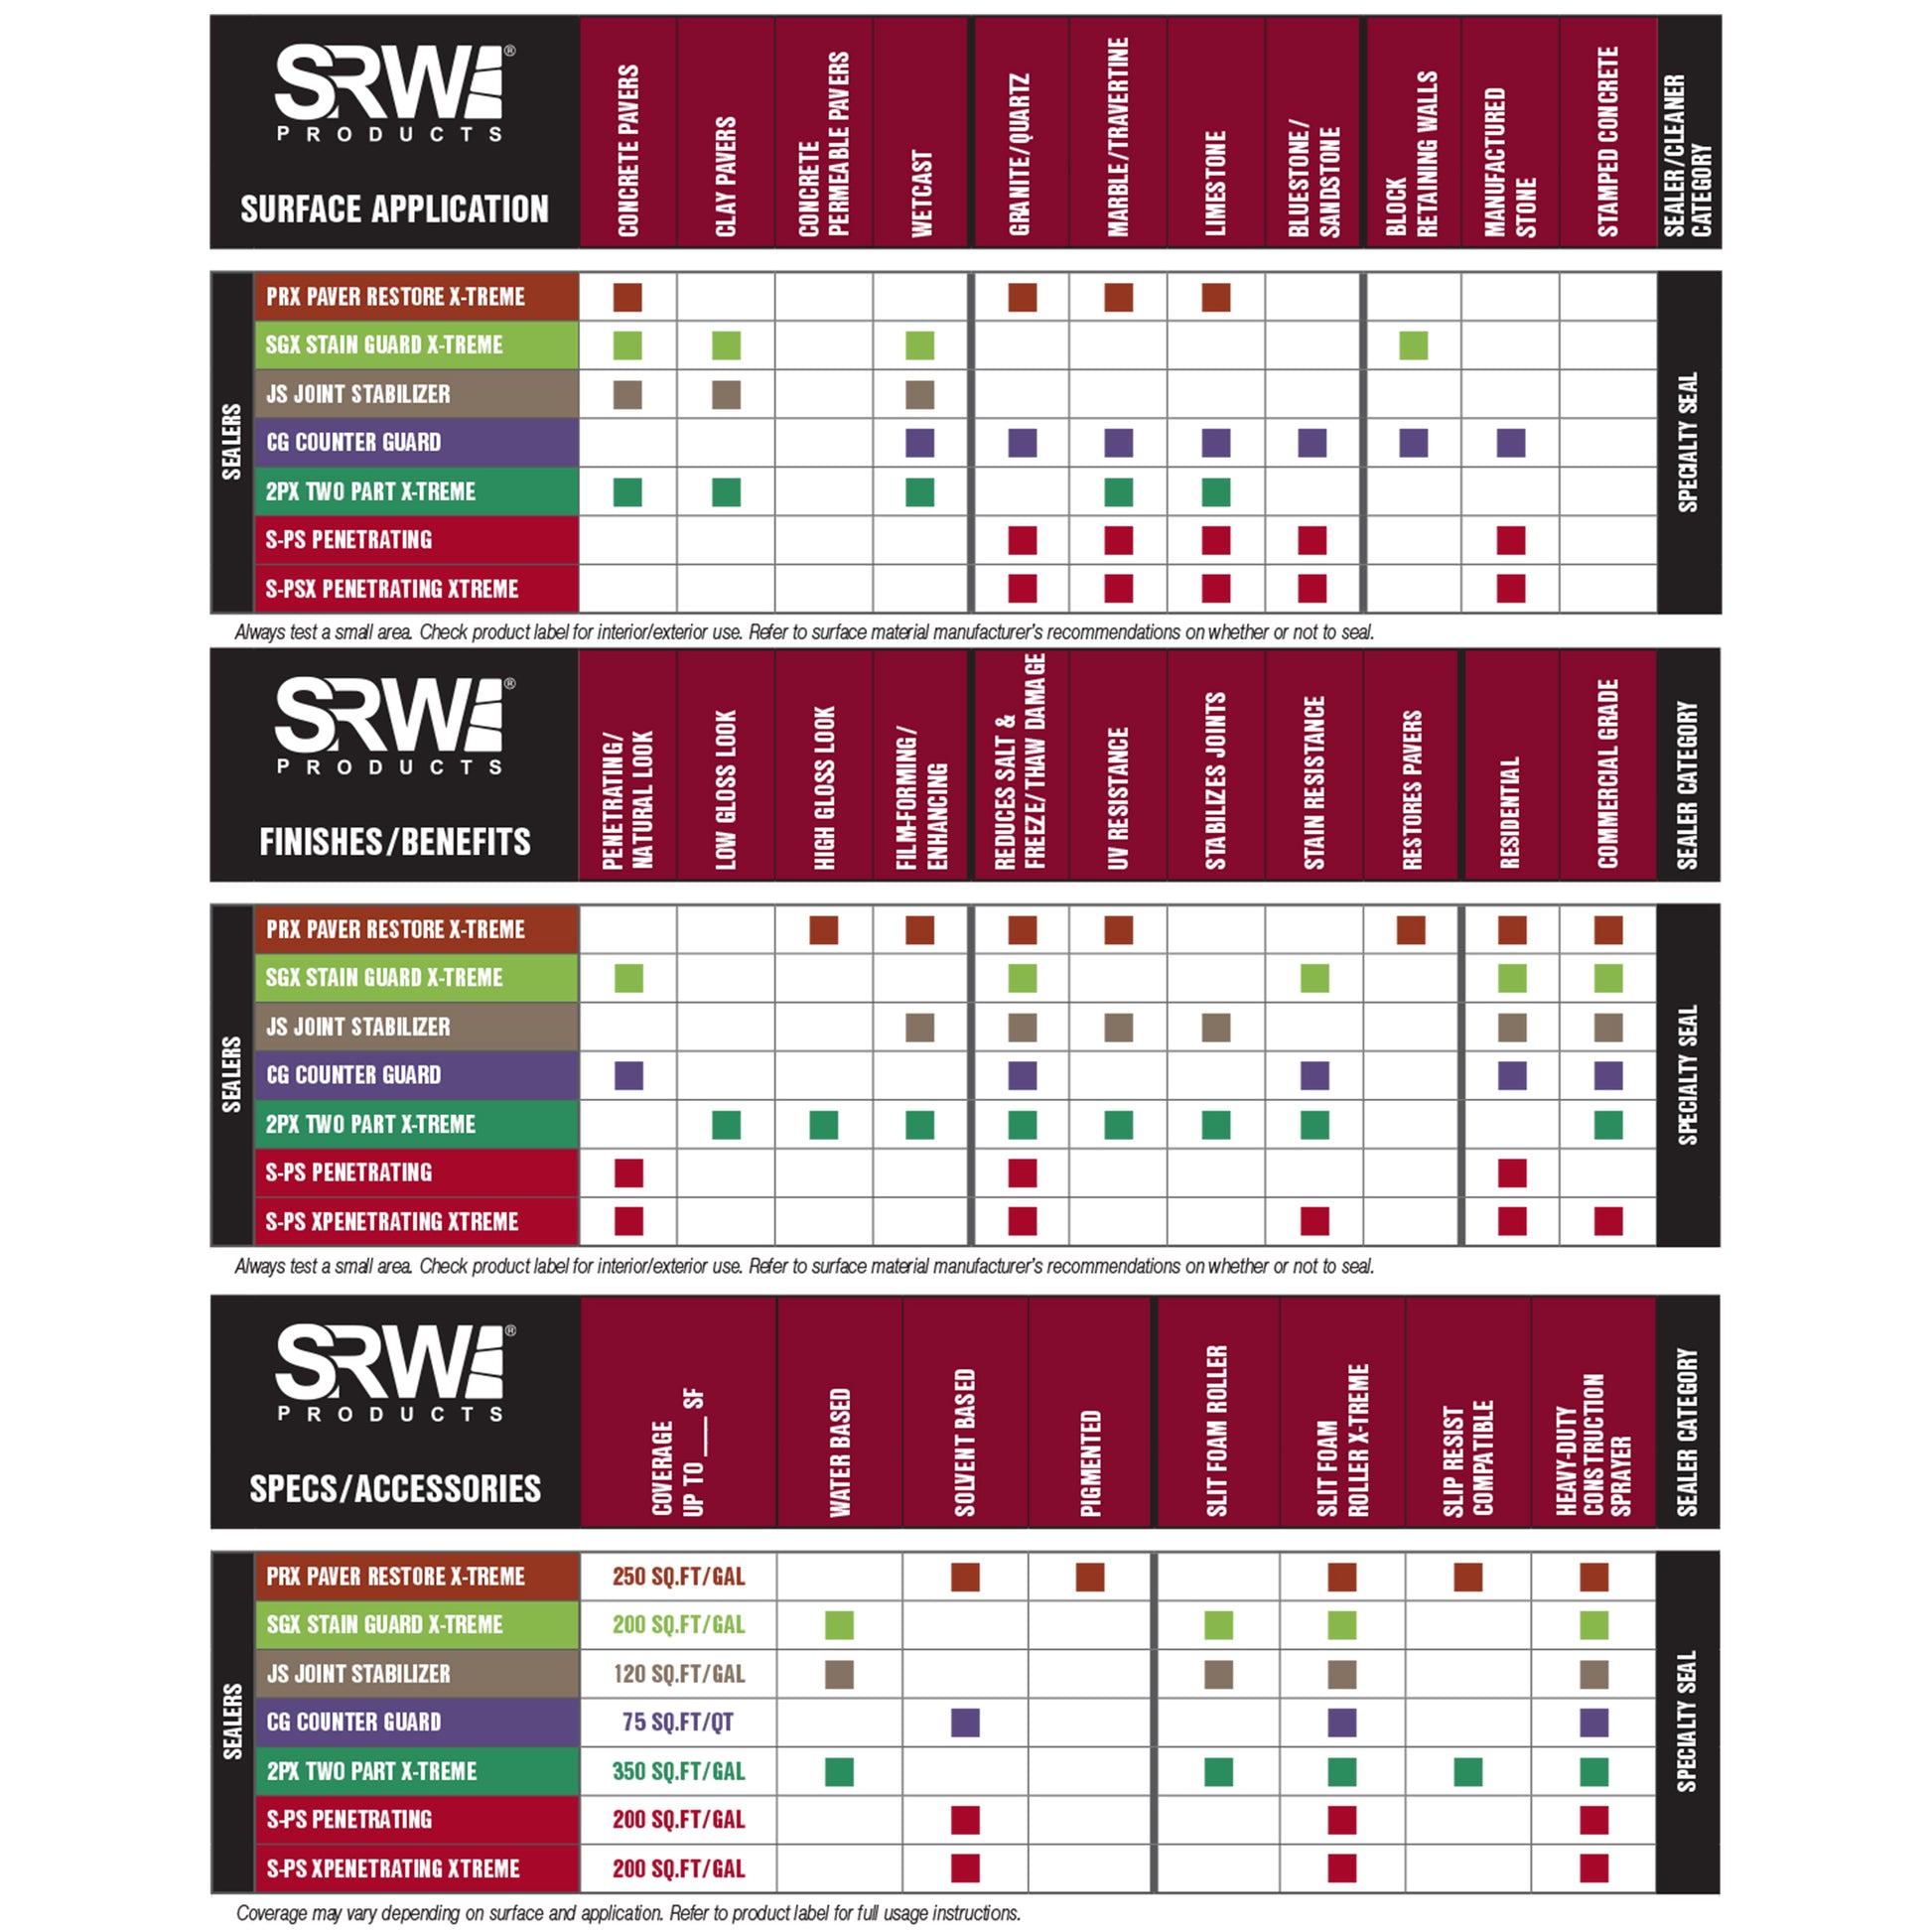 srw products specialty chart